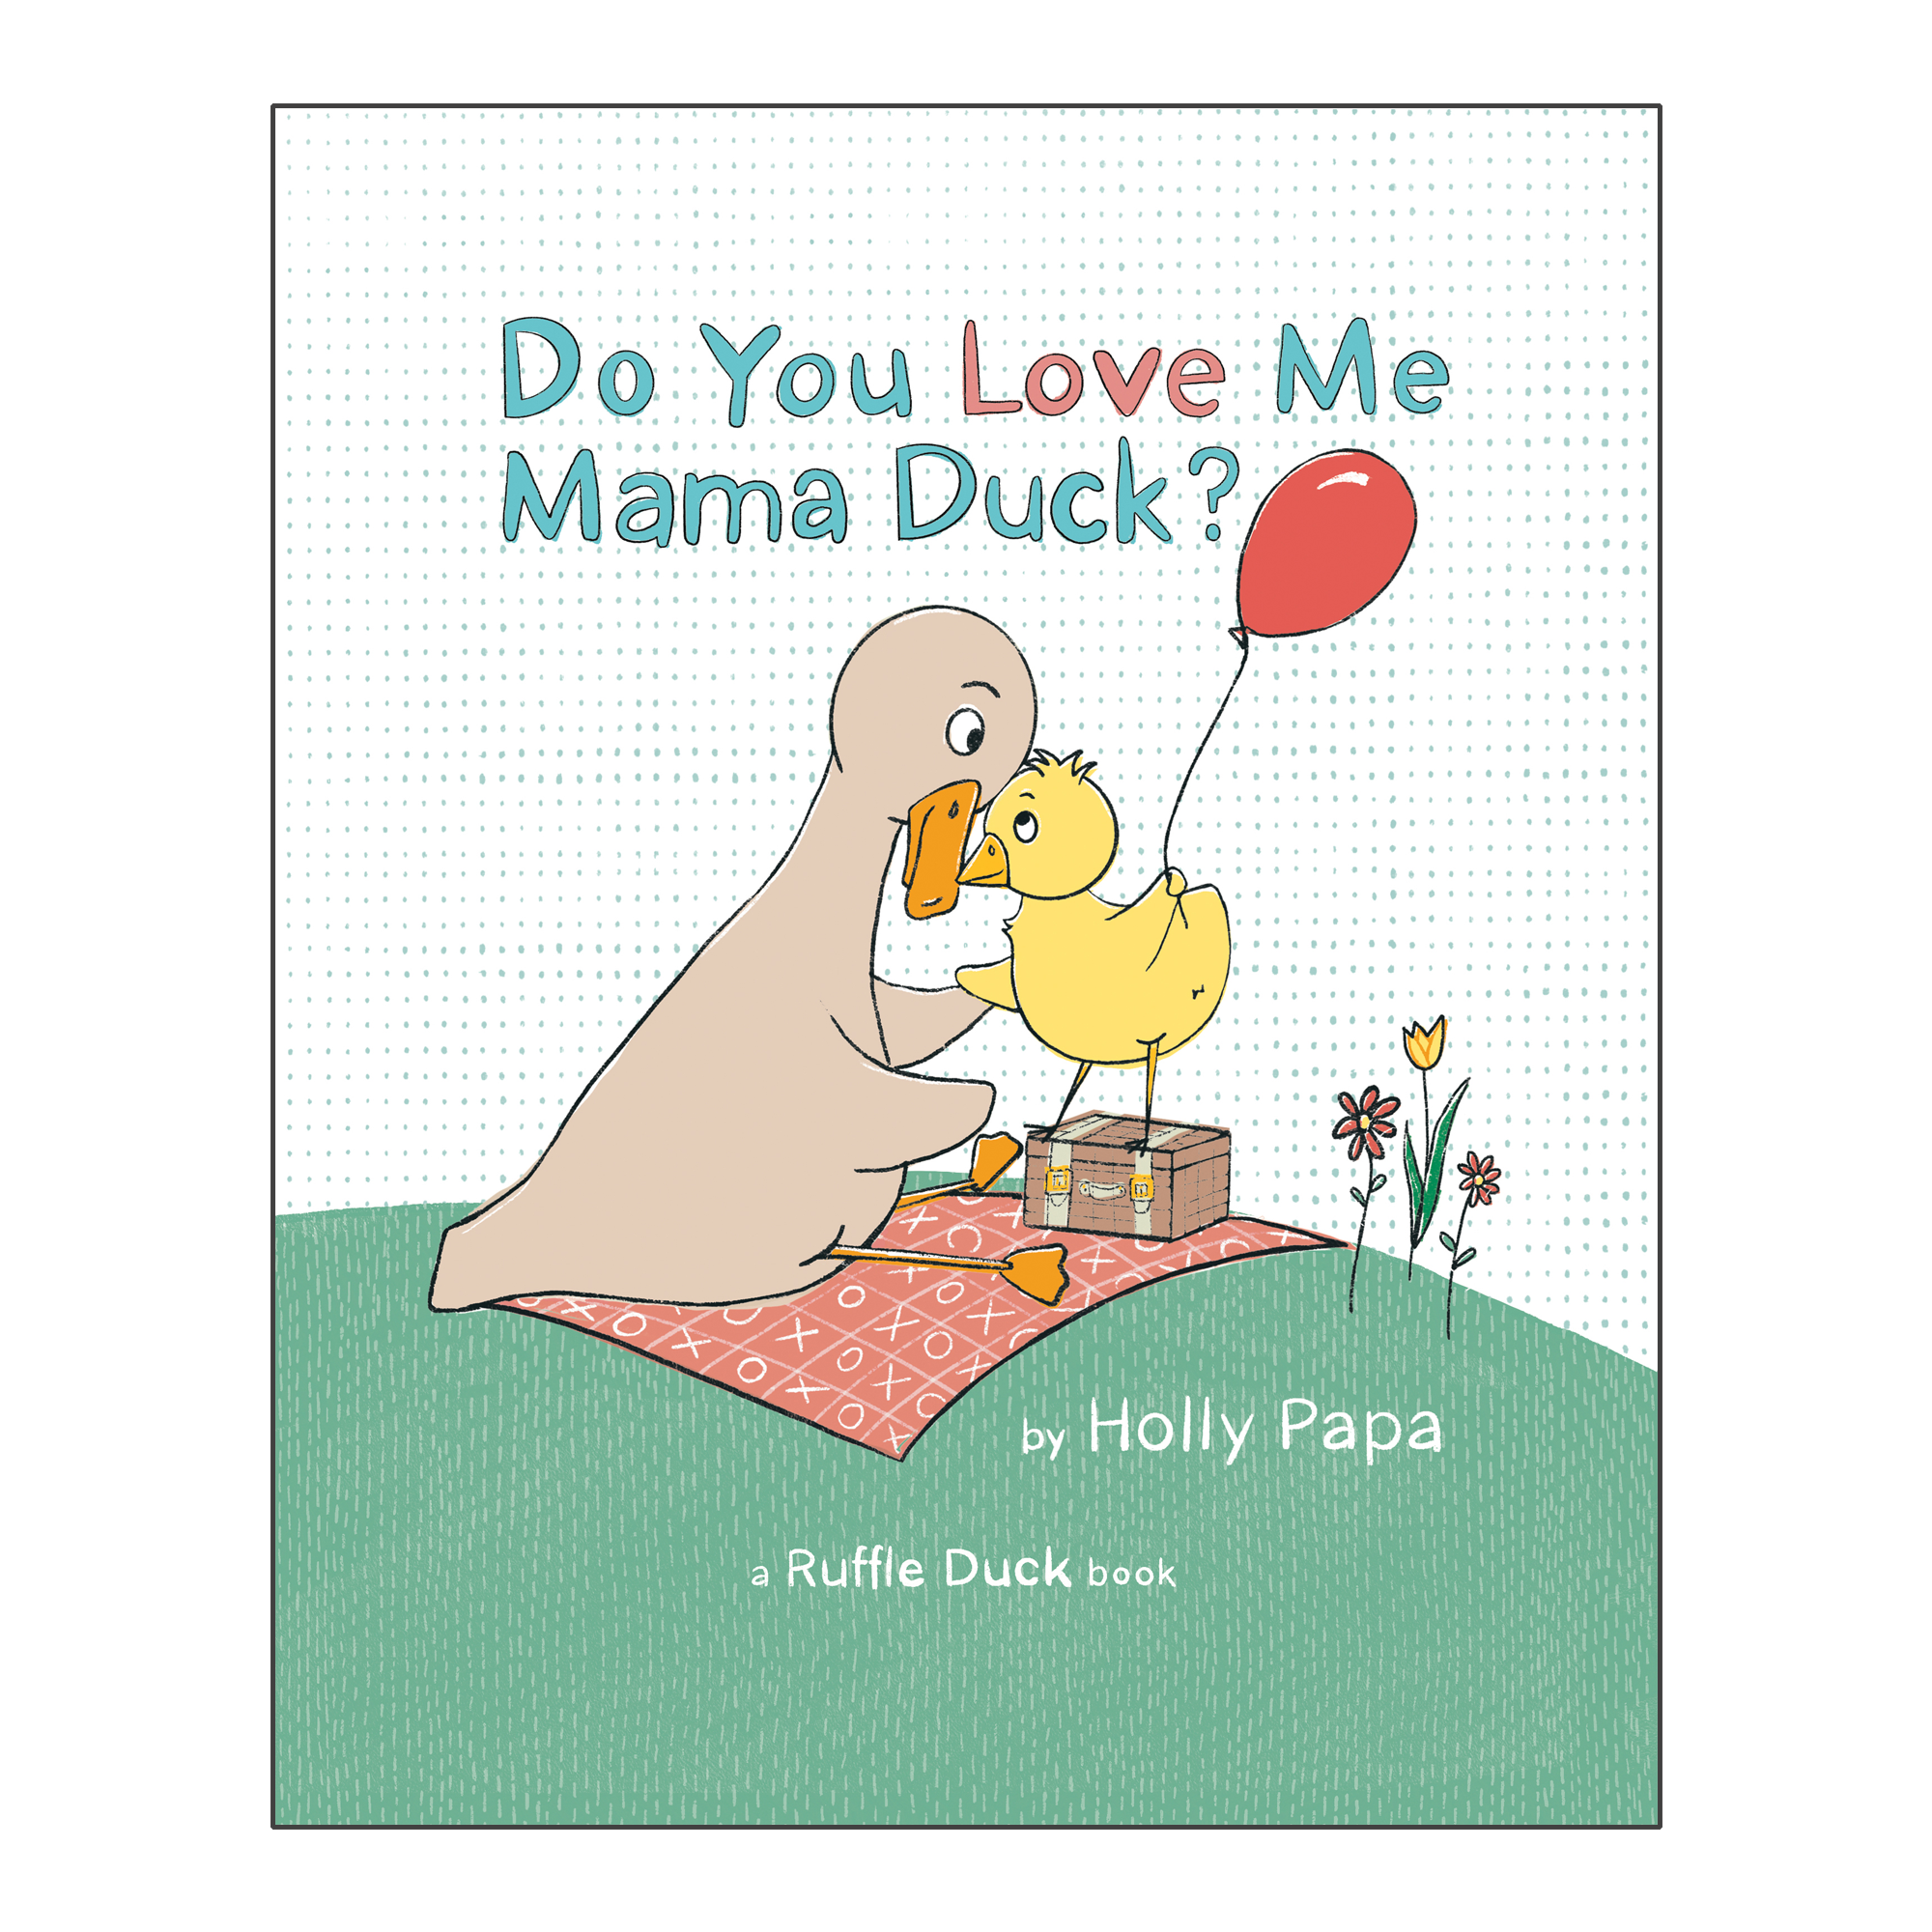 Cover of Children's picture book Do You Love Me Mama Duck?